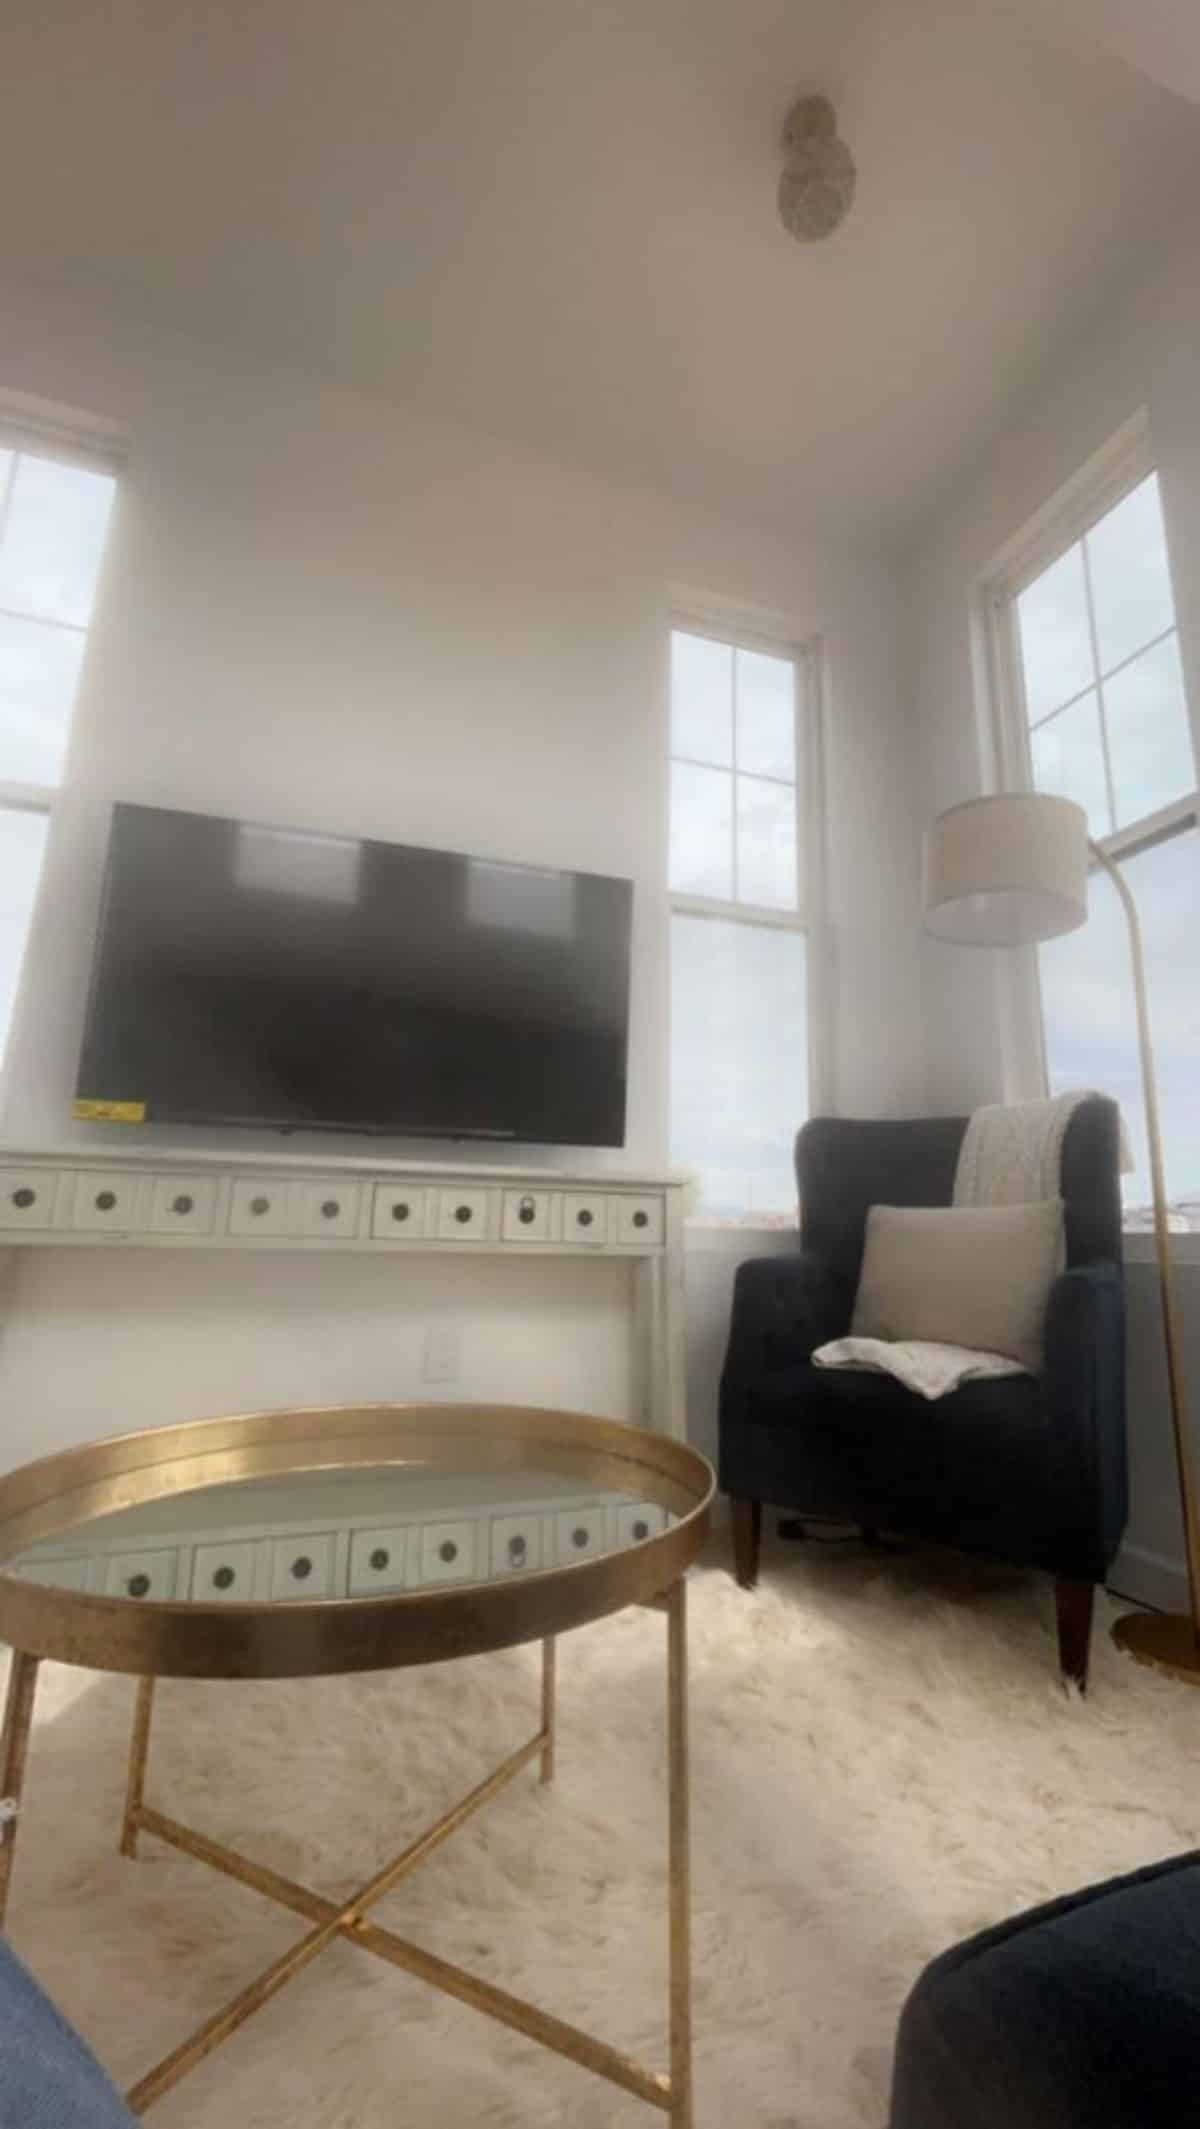 wall mounted TV set with center table in living area